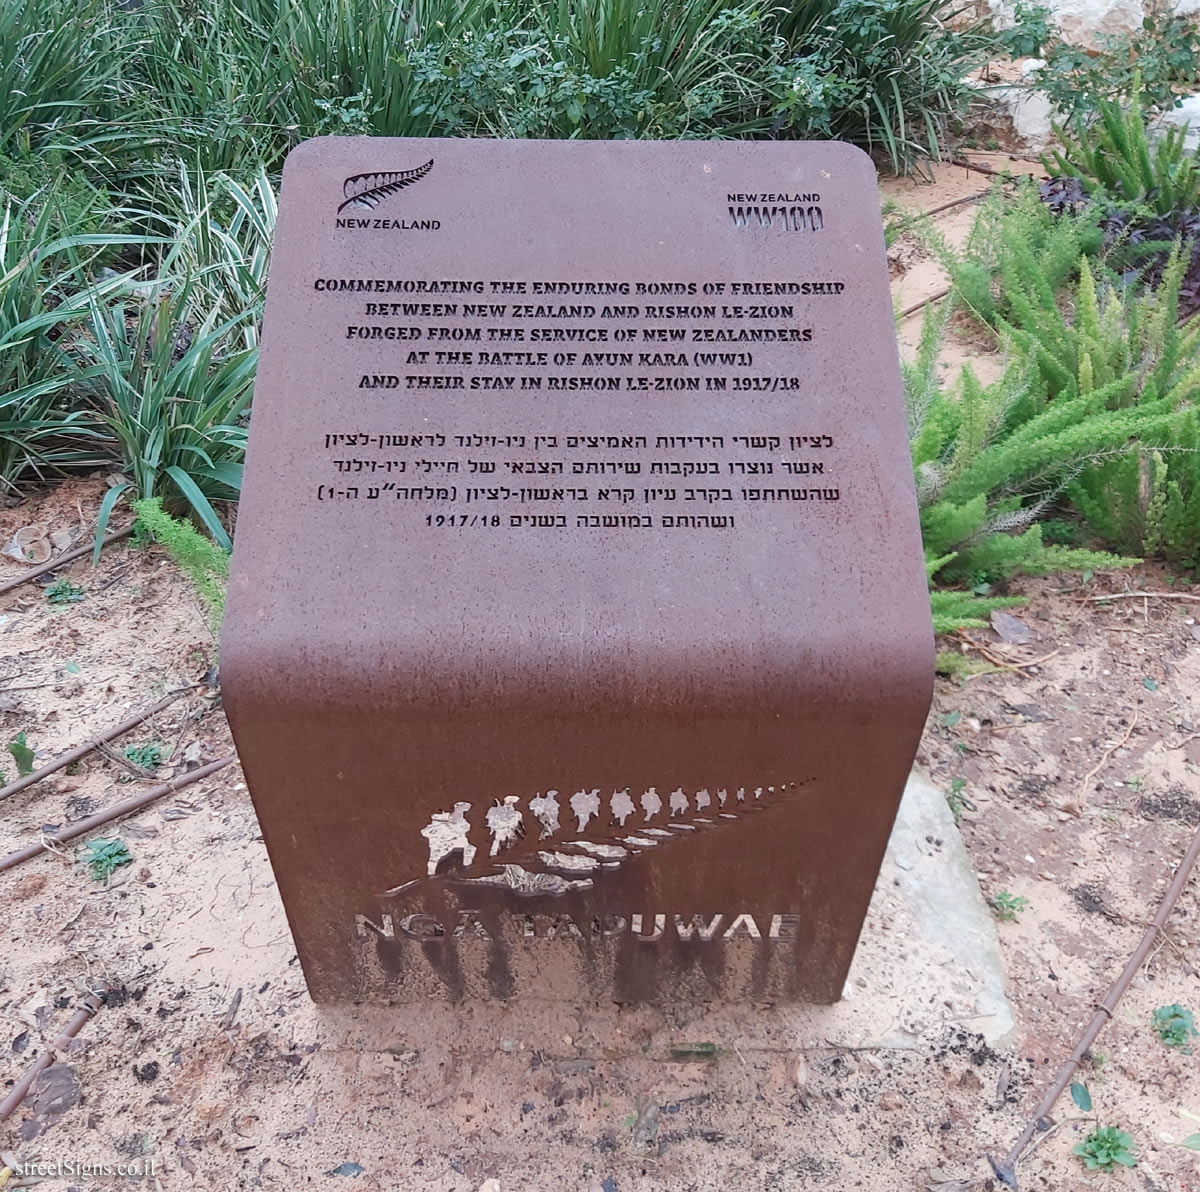 Rishon Lezion - Commemorating the New Zealand fighters in the Battle of Ayun Kara